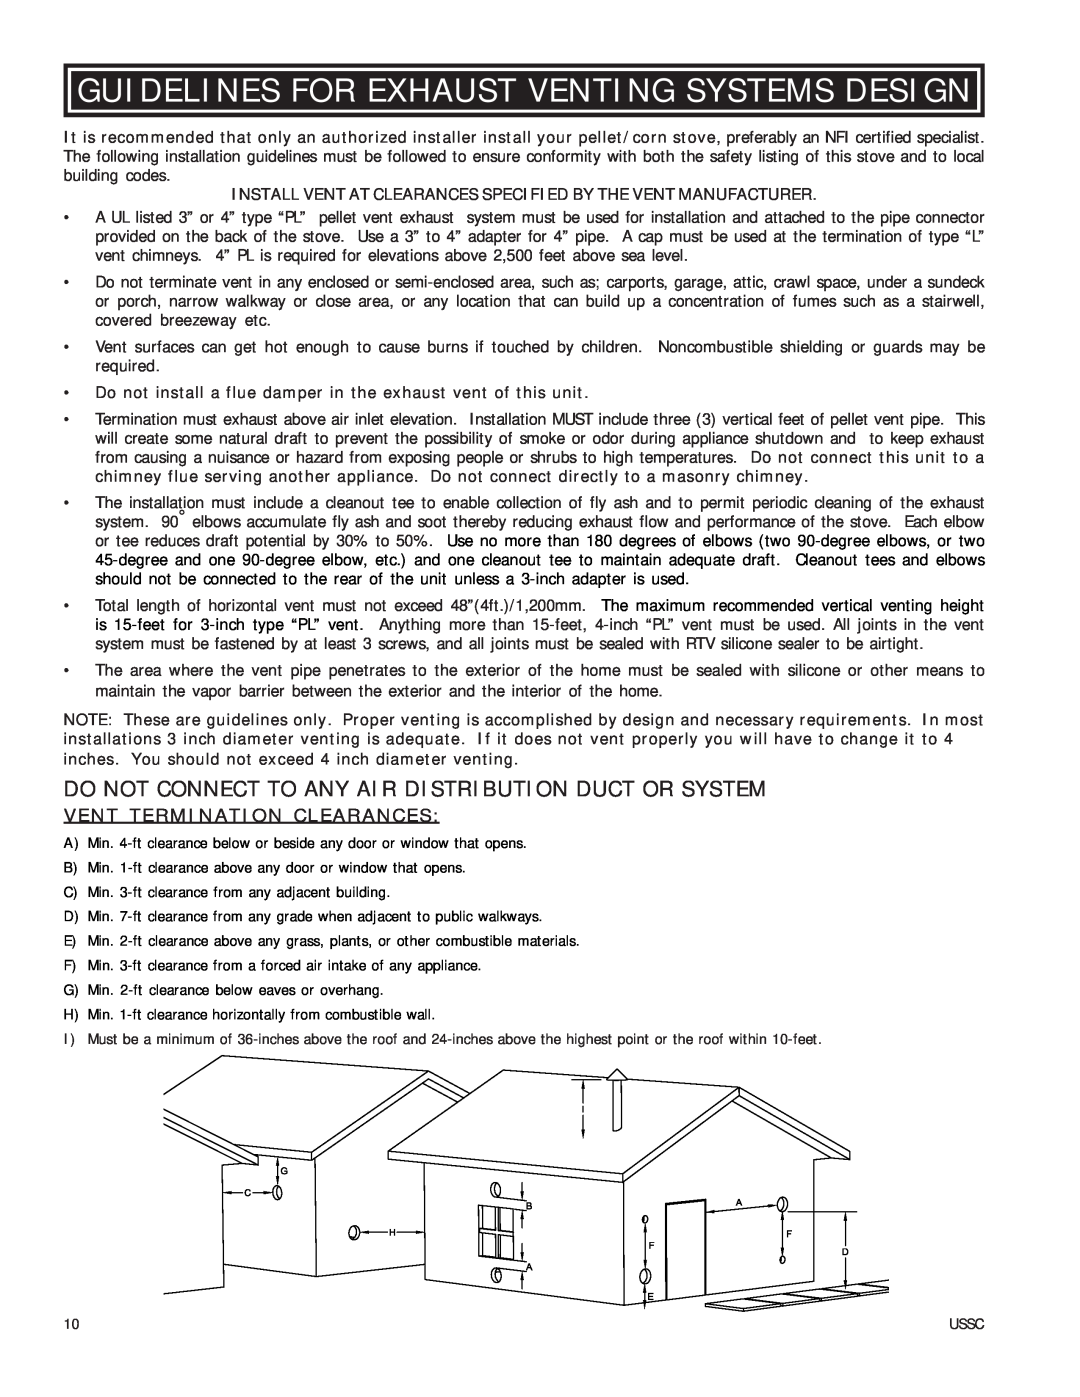 United States Stove 6039I owner manual Guidelines For Exhaust Venting Systems Design, Vent Termination Clearances 